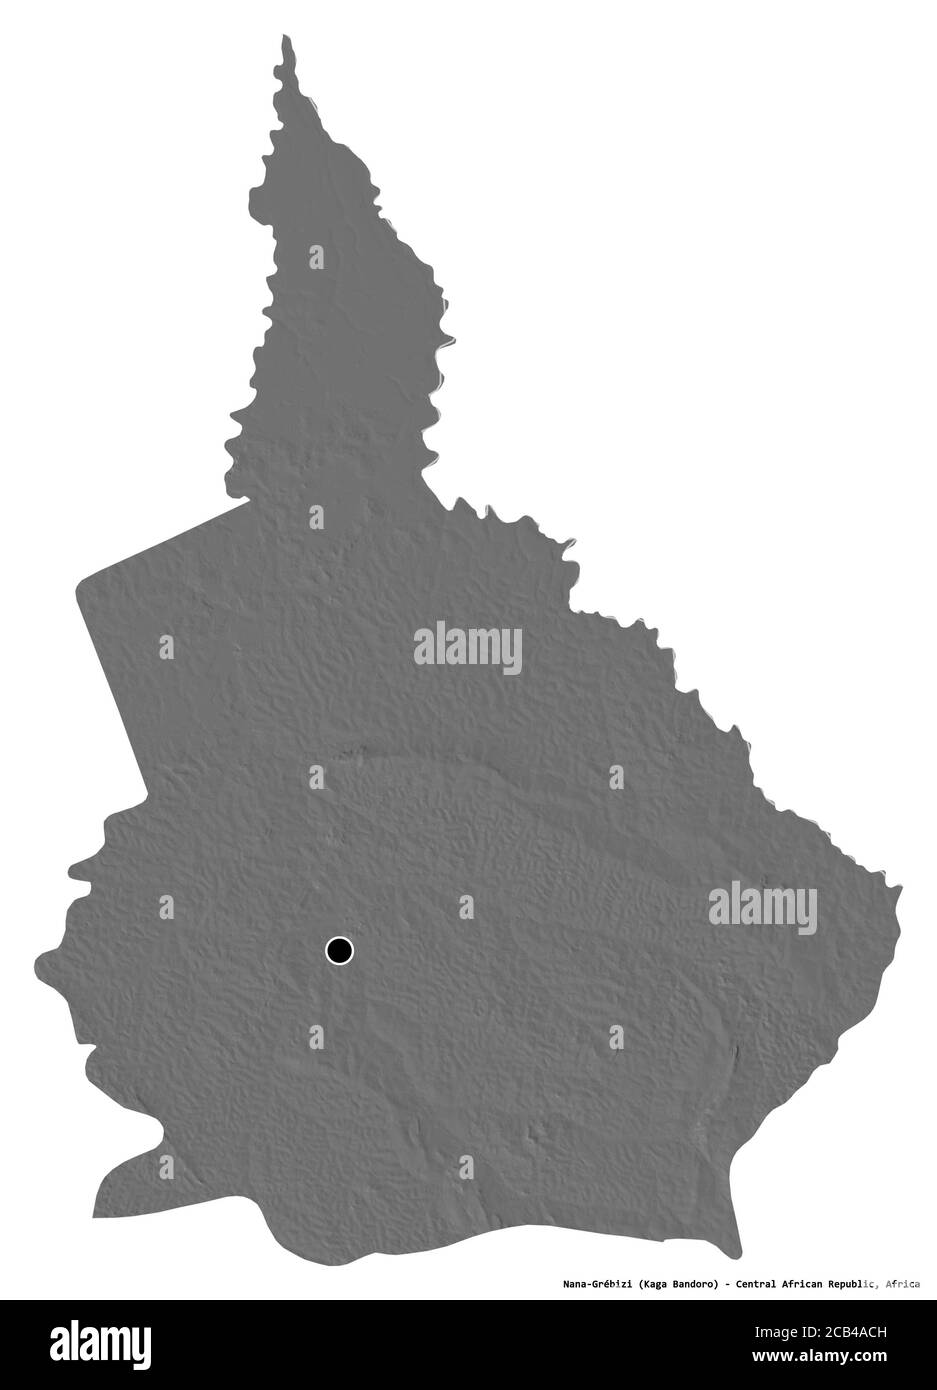 Shape of Nana-Grébizi, economic prefecture of Central African Republic, with its capital isolated on white background. Bilevel elevation map. 3D rende Stock Photo